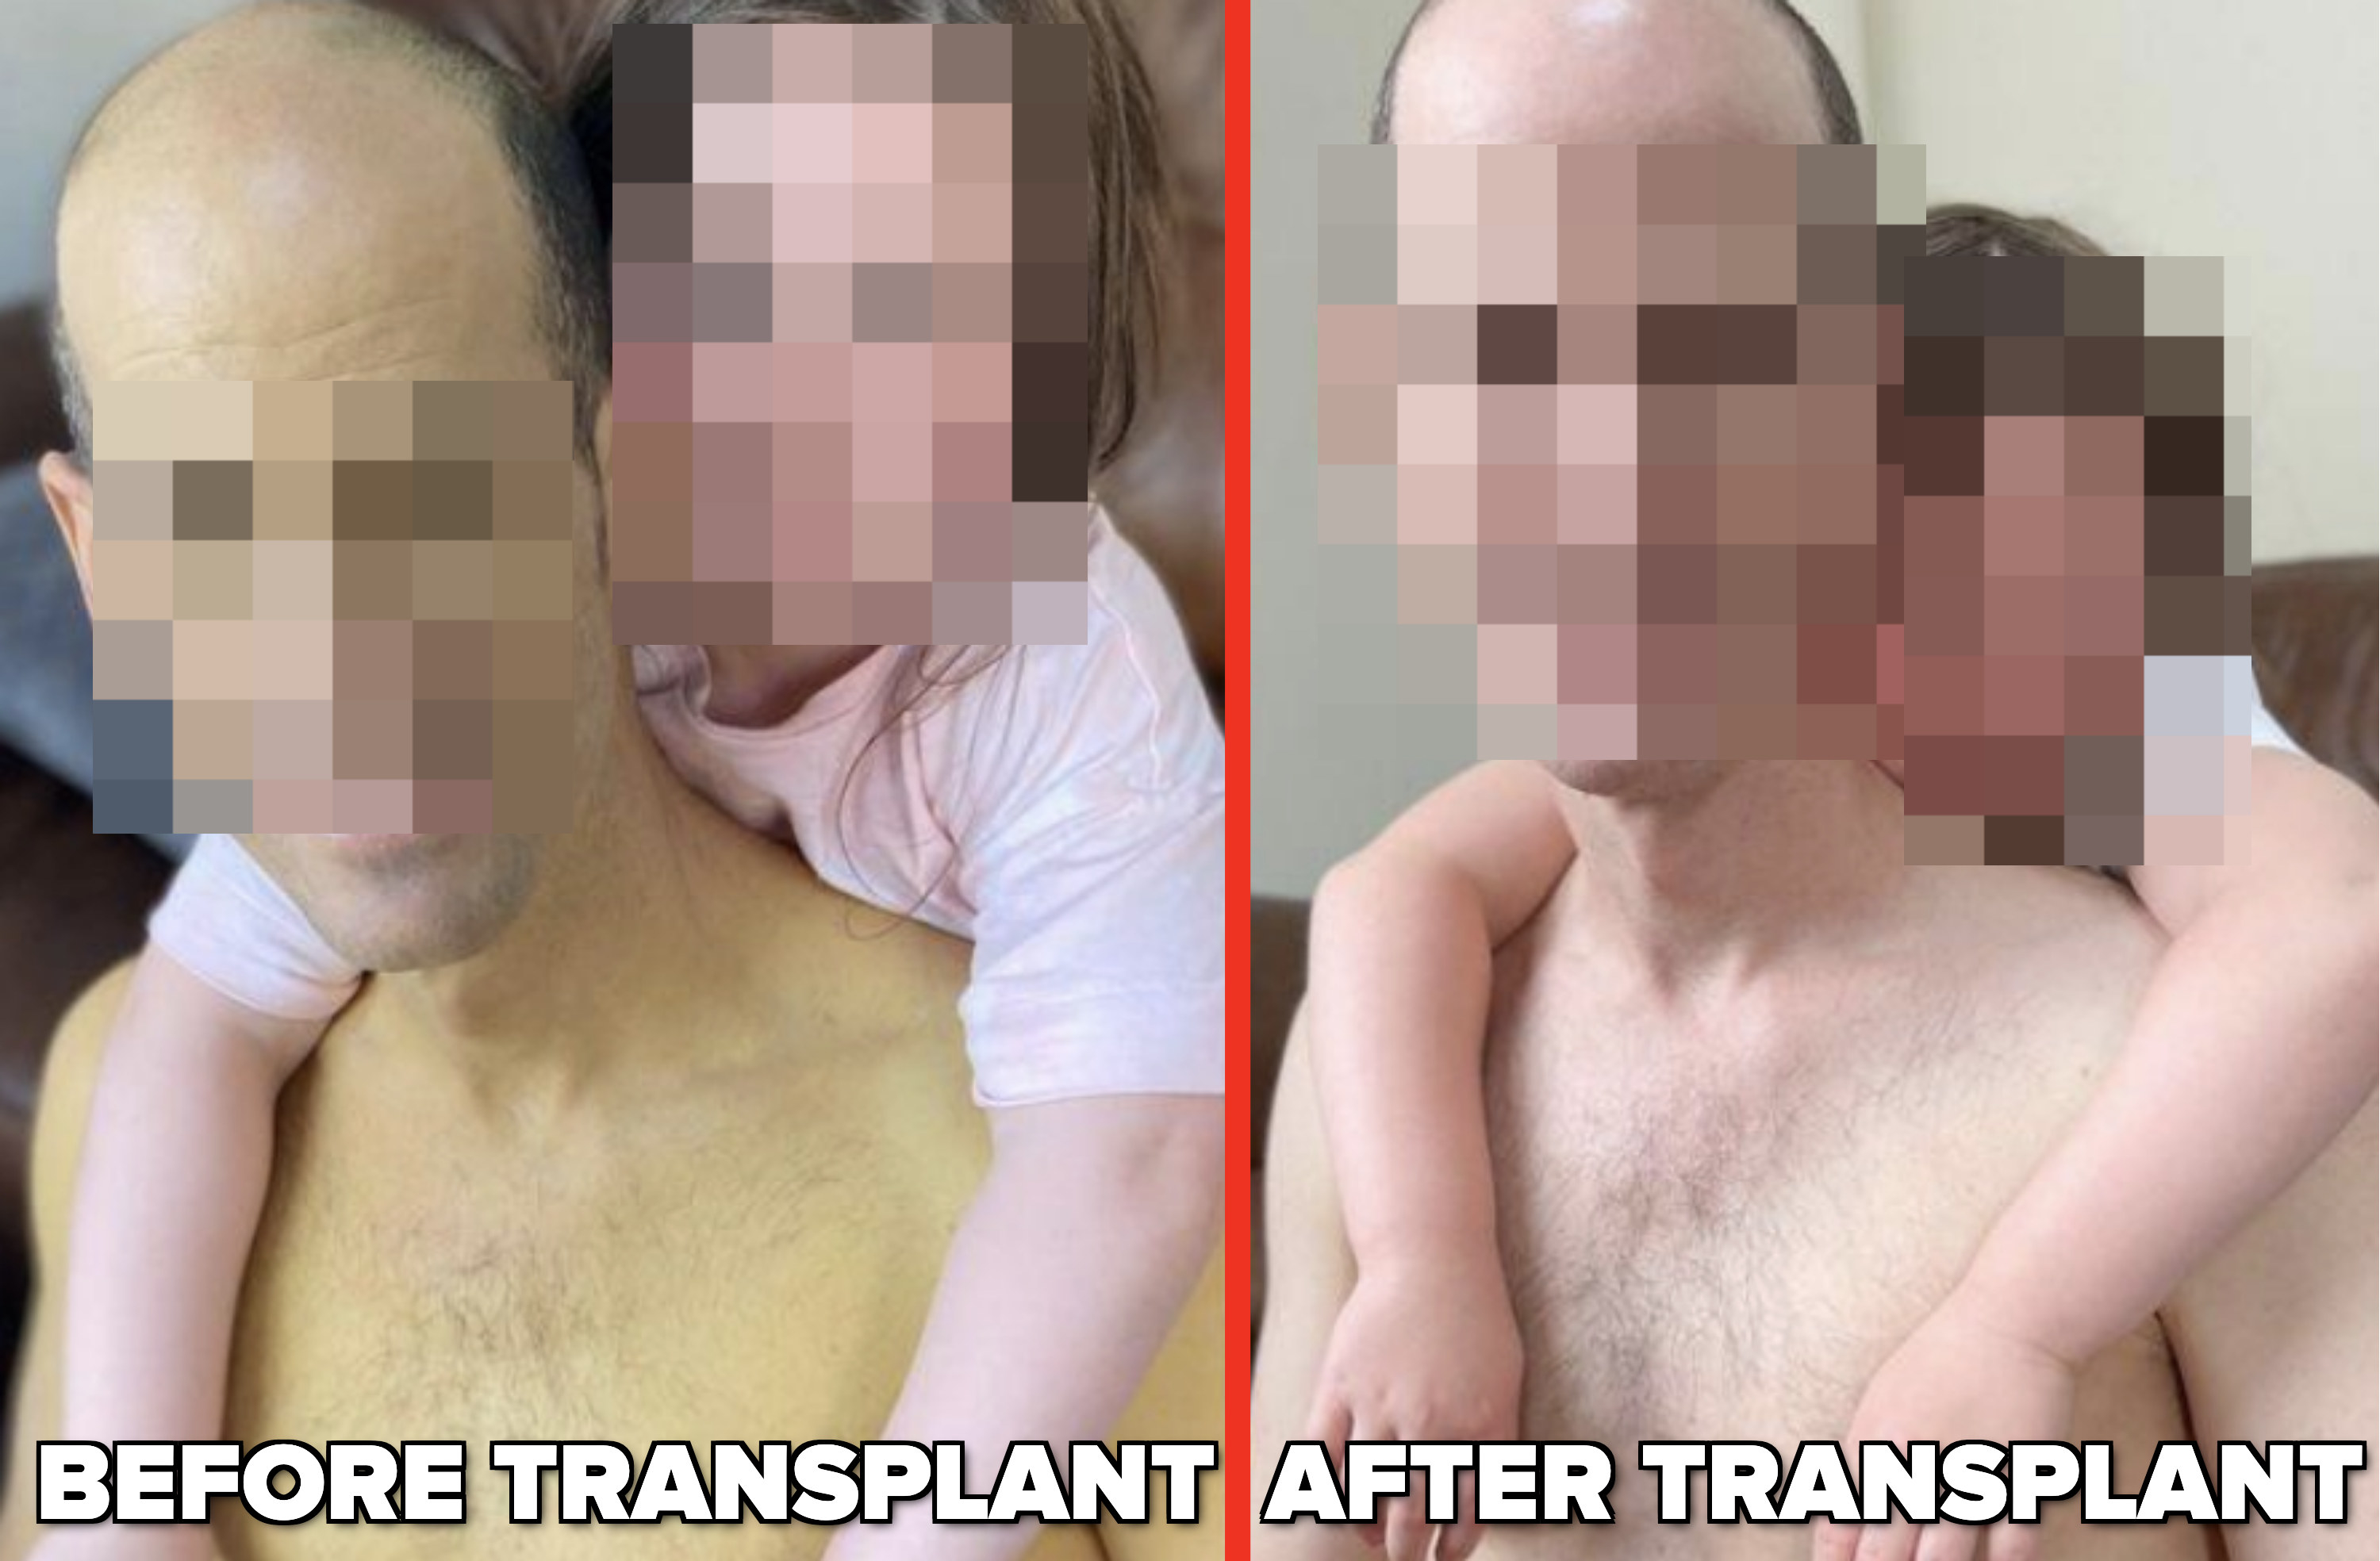 Before and after a liver transplant